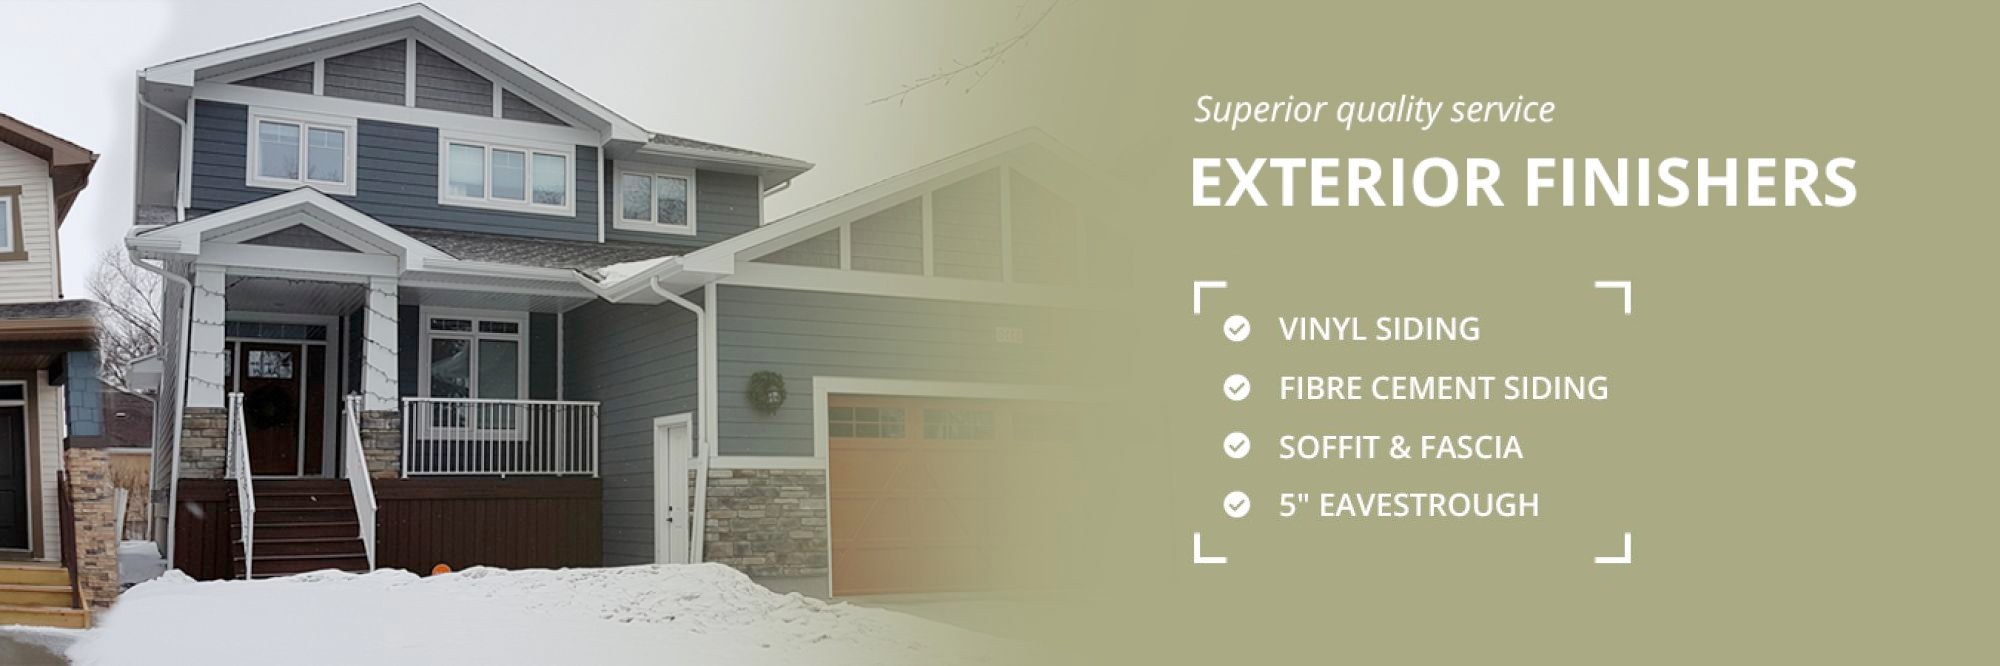 Exterior Finishers Direct